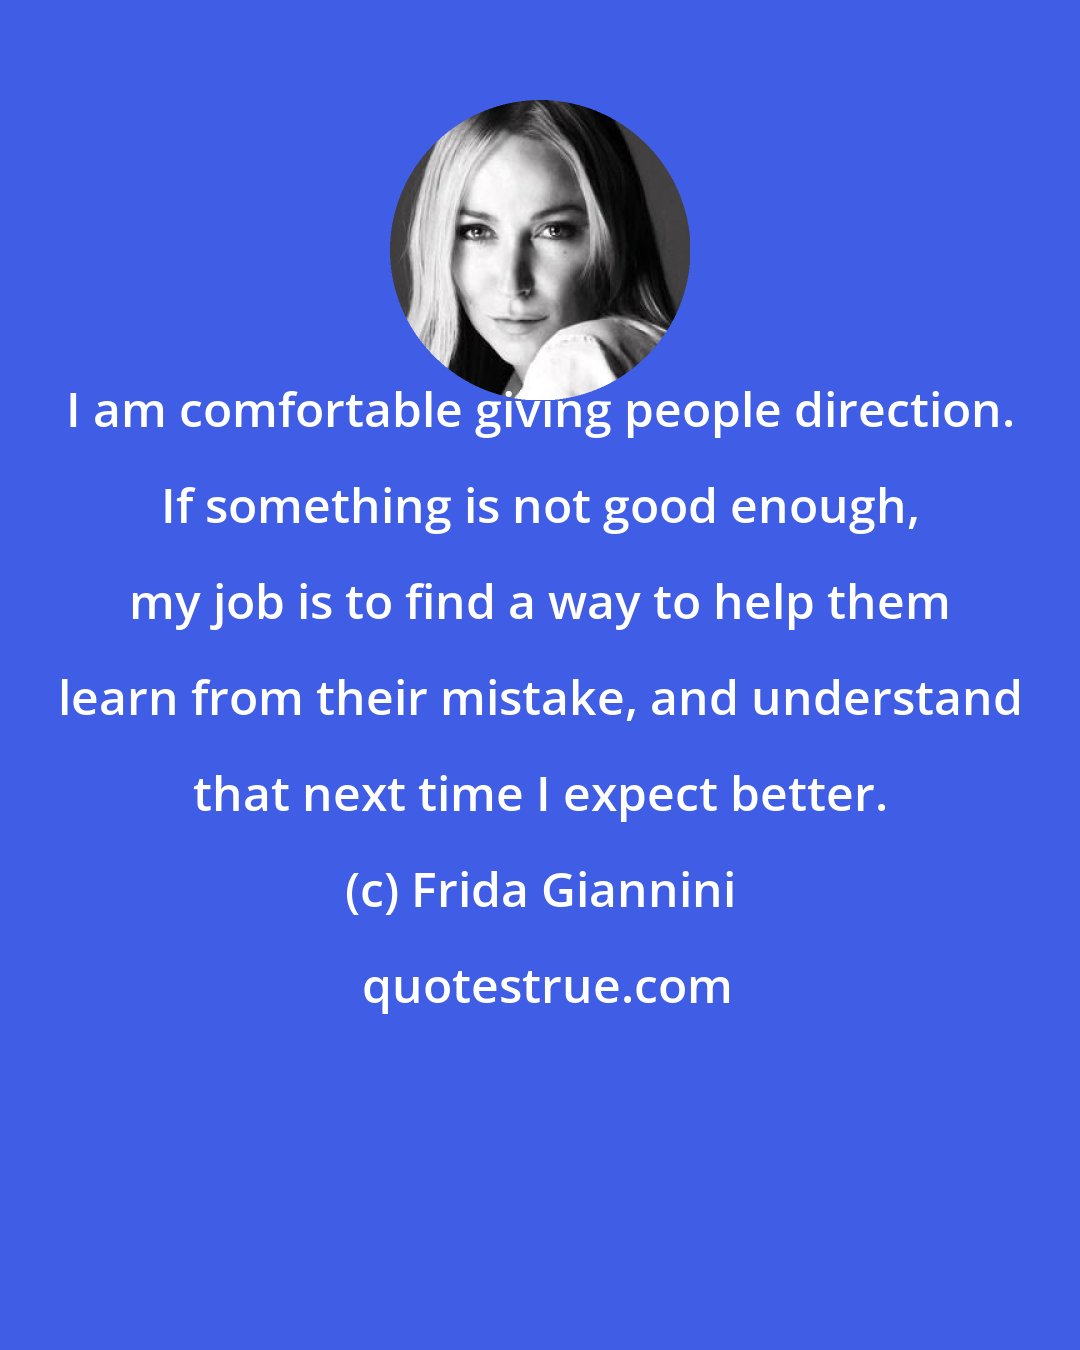 Frida Giannini: I am comfortable giving people direction. If something is not good enough, my job is to find a way to help them learn from their mistake, and understand that next time I expect better.